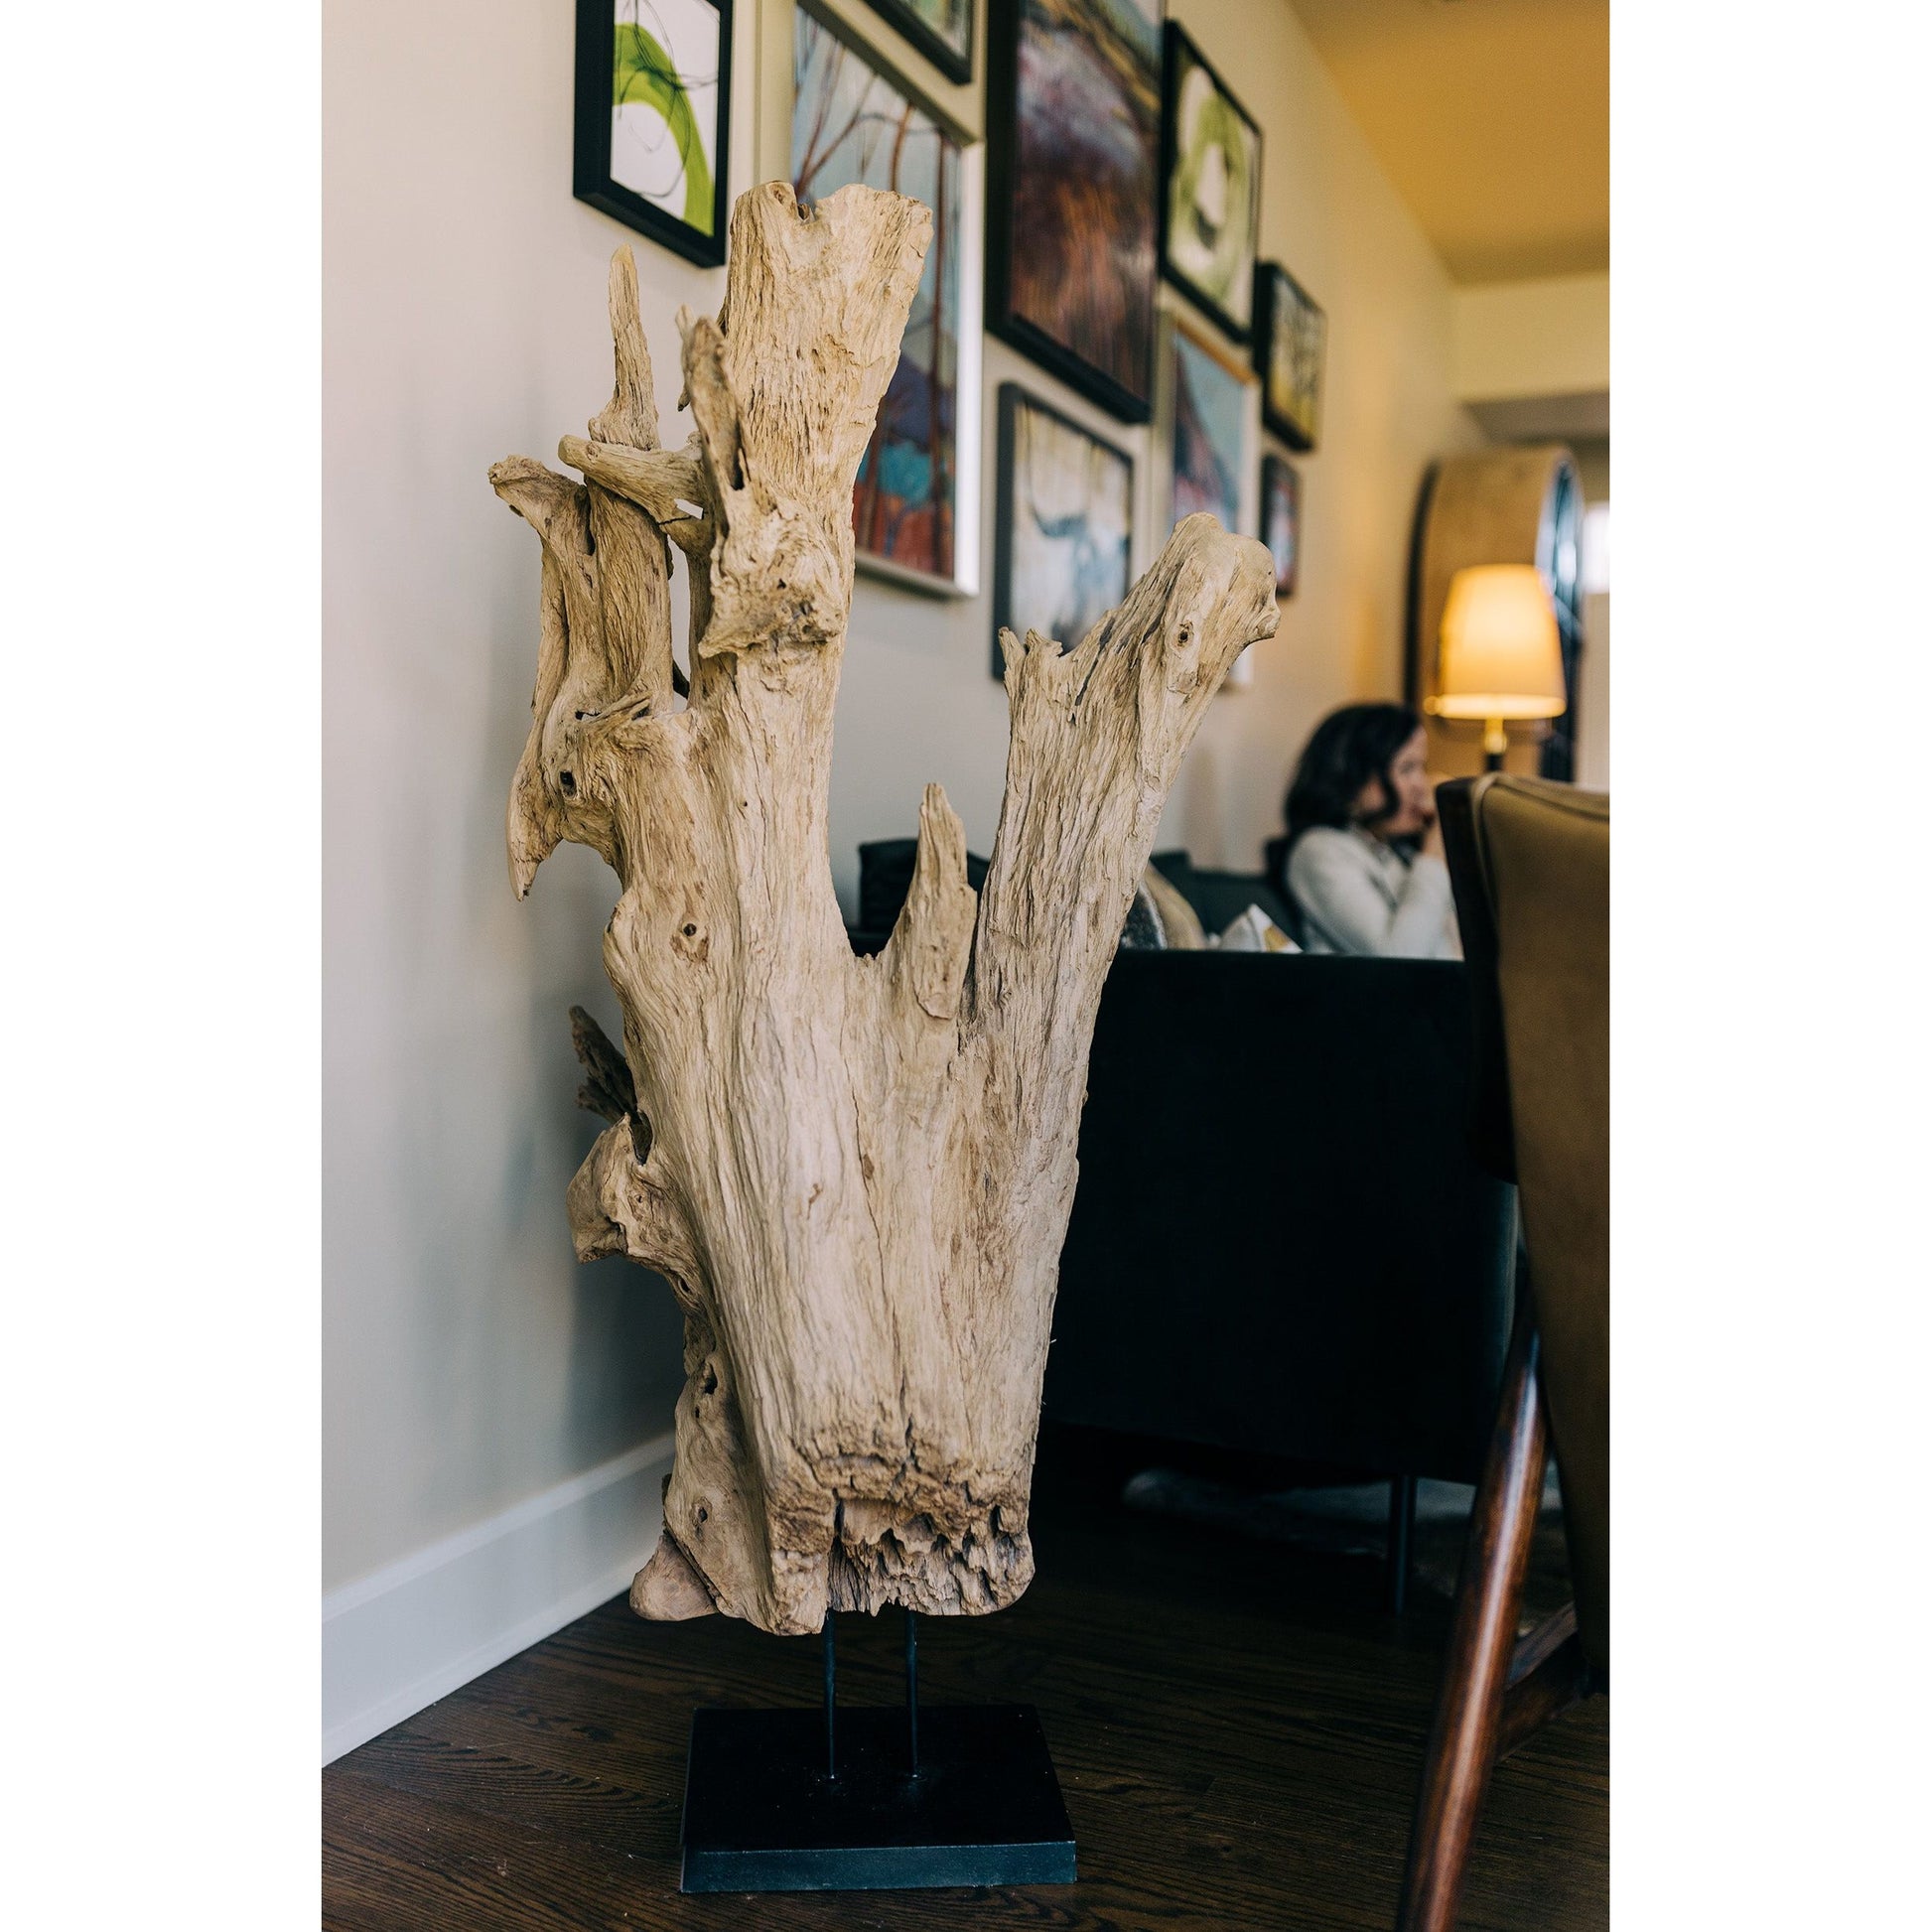 A Driftwood Erosion Wood Sculpture, reminiscent of eroded driftwood with a natural, intricate design, stands on a black pedestal base against a wall. In the background, an individual with long hair sits on a black couch. The wall behind them is adorned with various framed artworks. The floor is wooden.